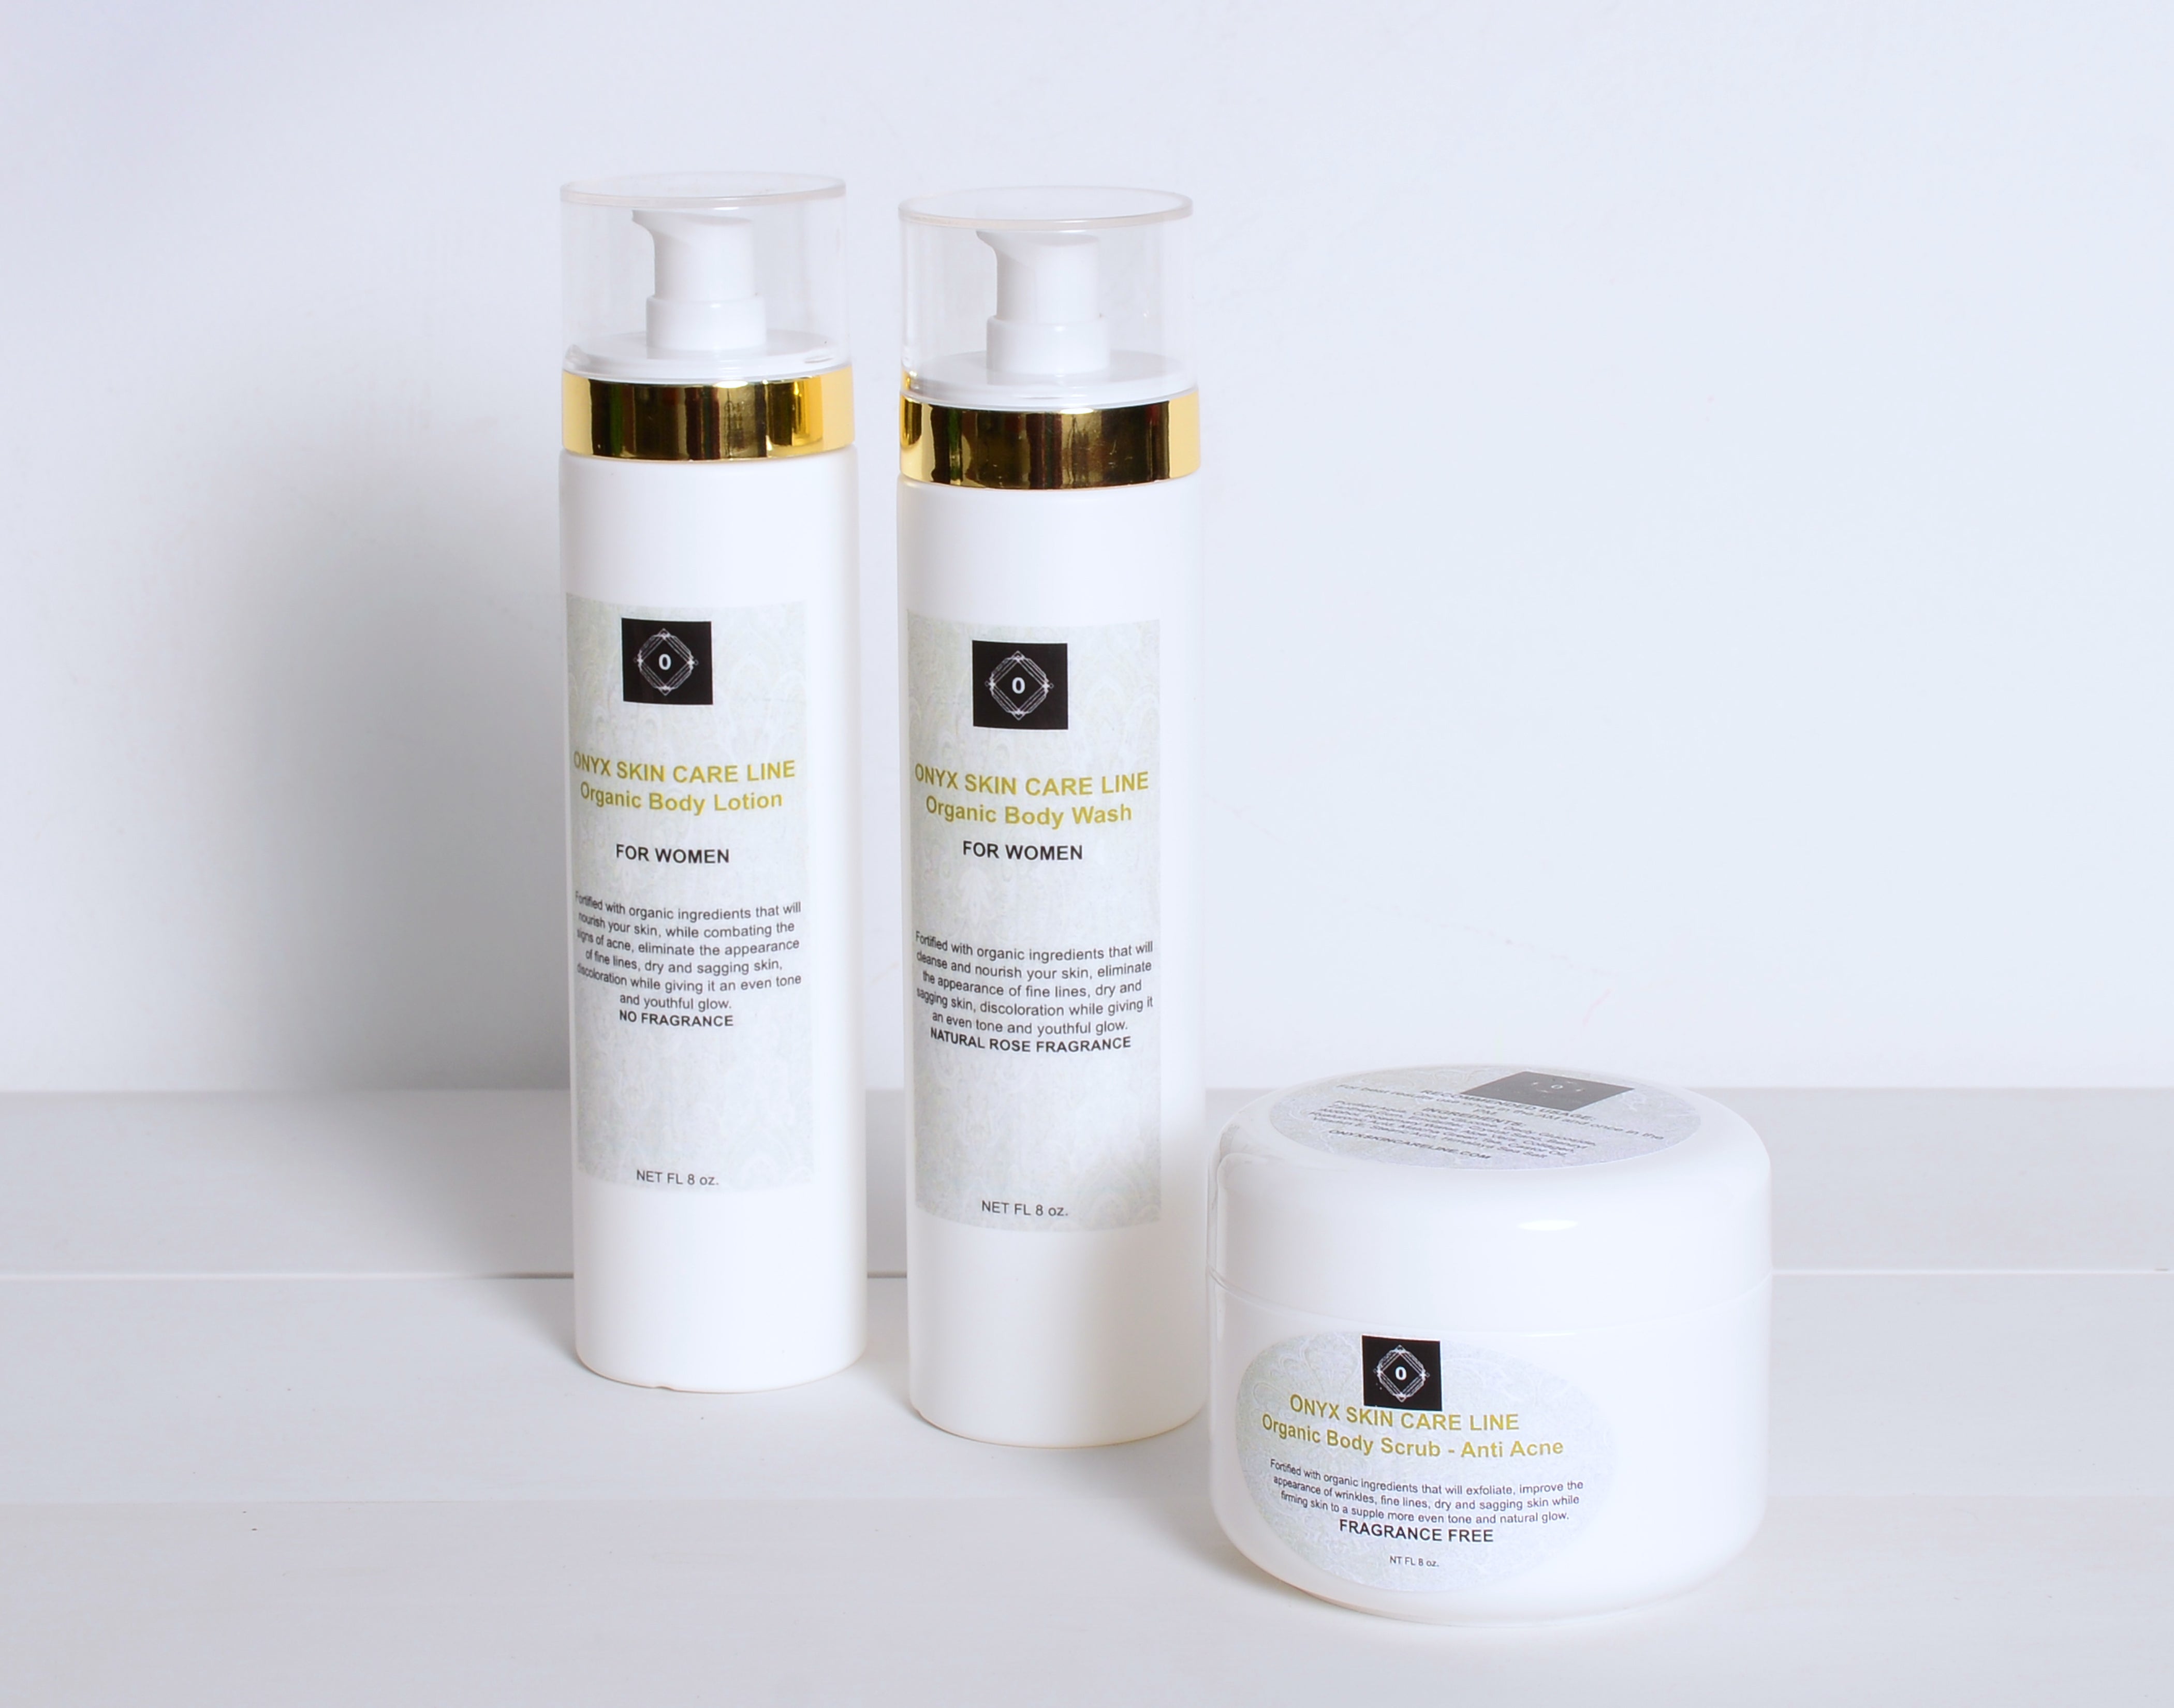 THREE STEP SKIN CARE SYSTEM - Nourishing Body Wash, Scrub and Lotion - Fragrance Free - for WOMEN -  ITEM CODE: 601950409228-0